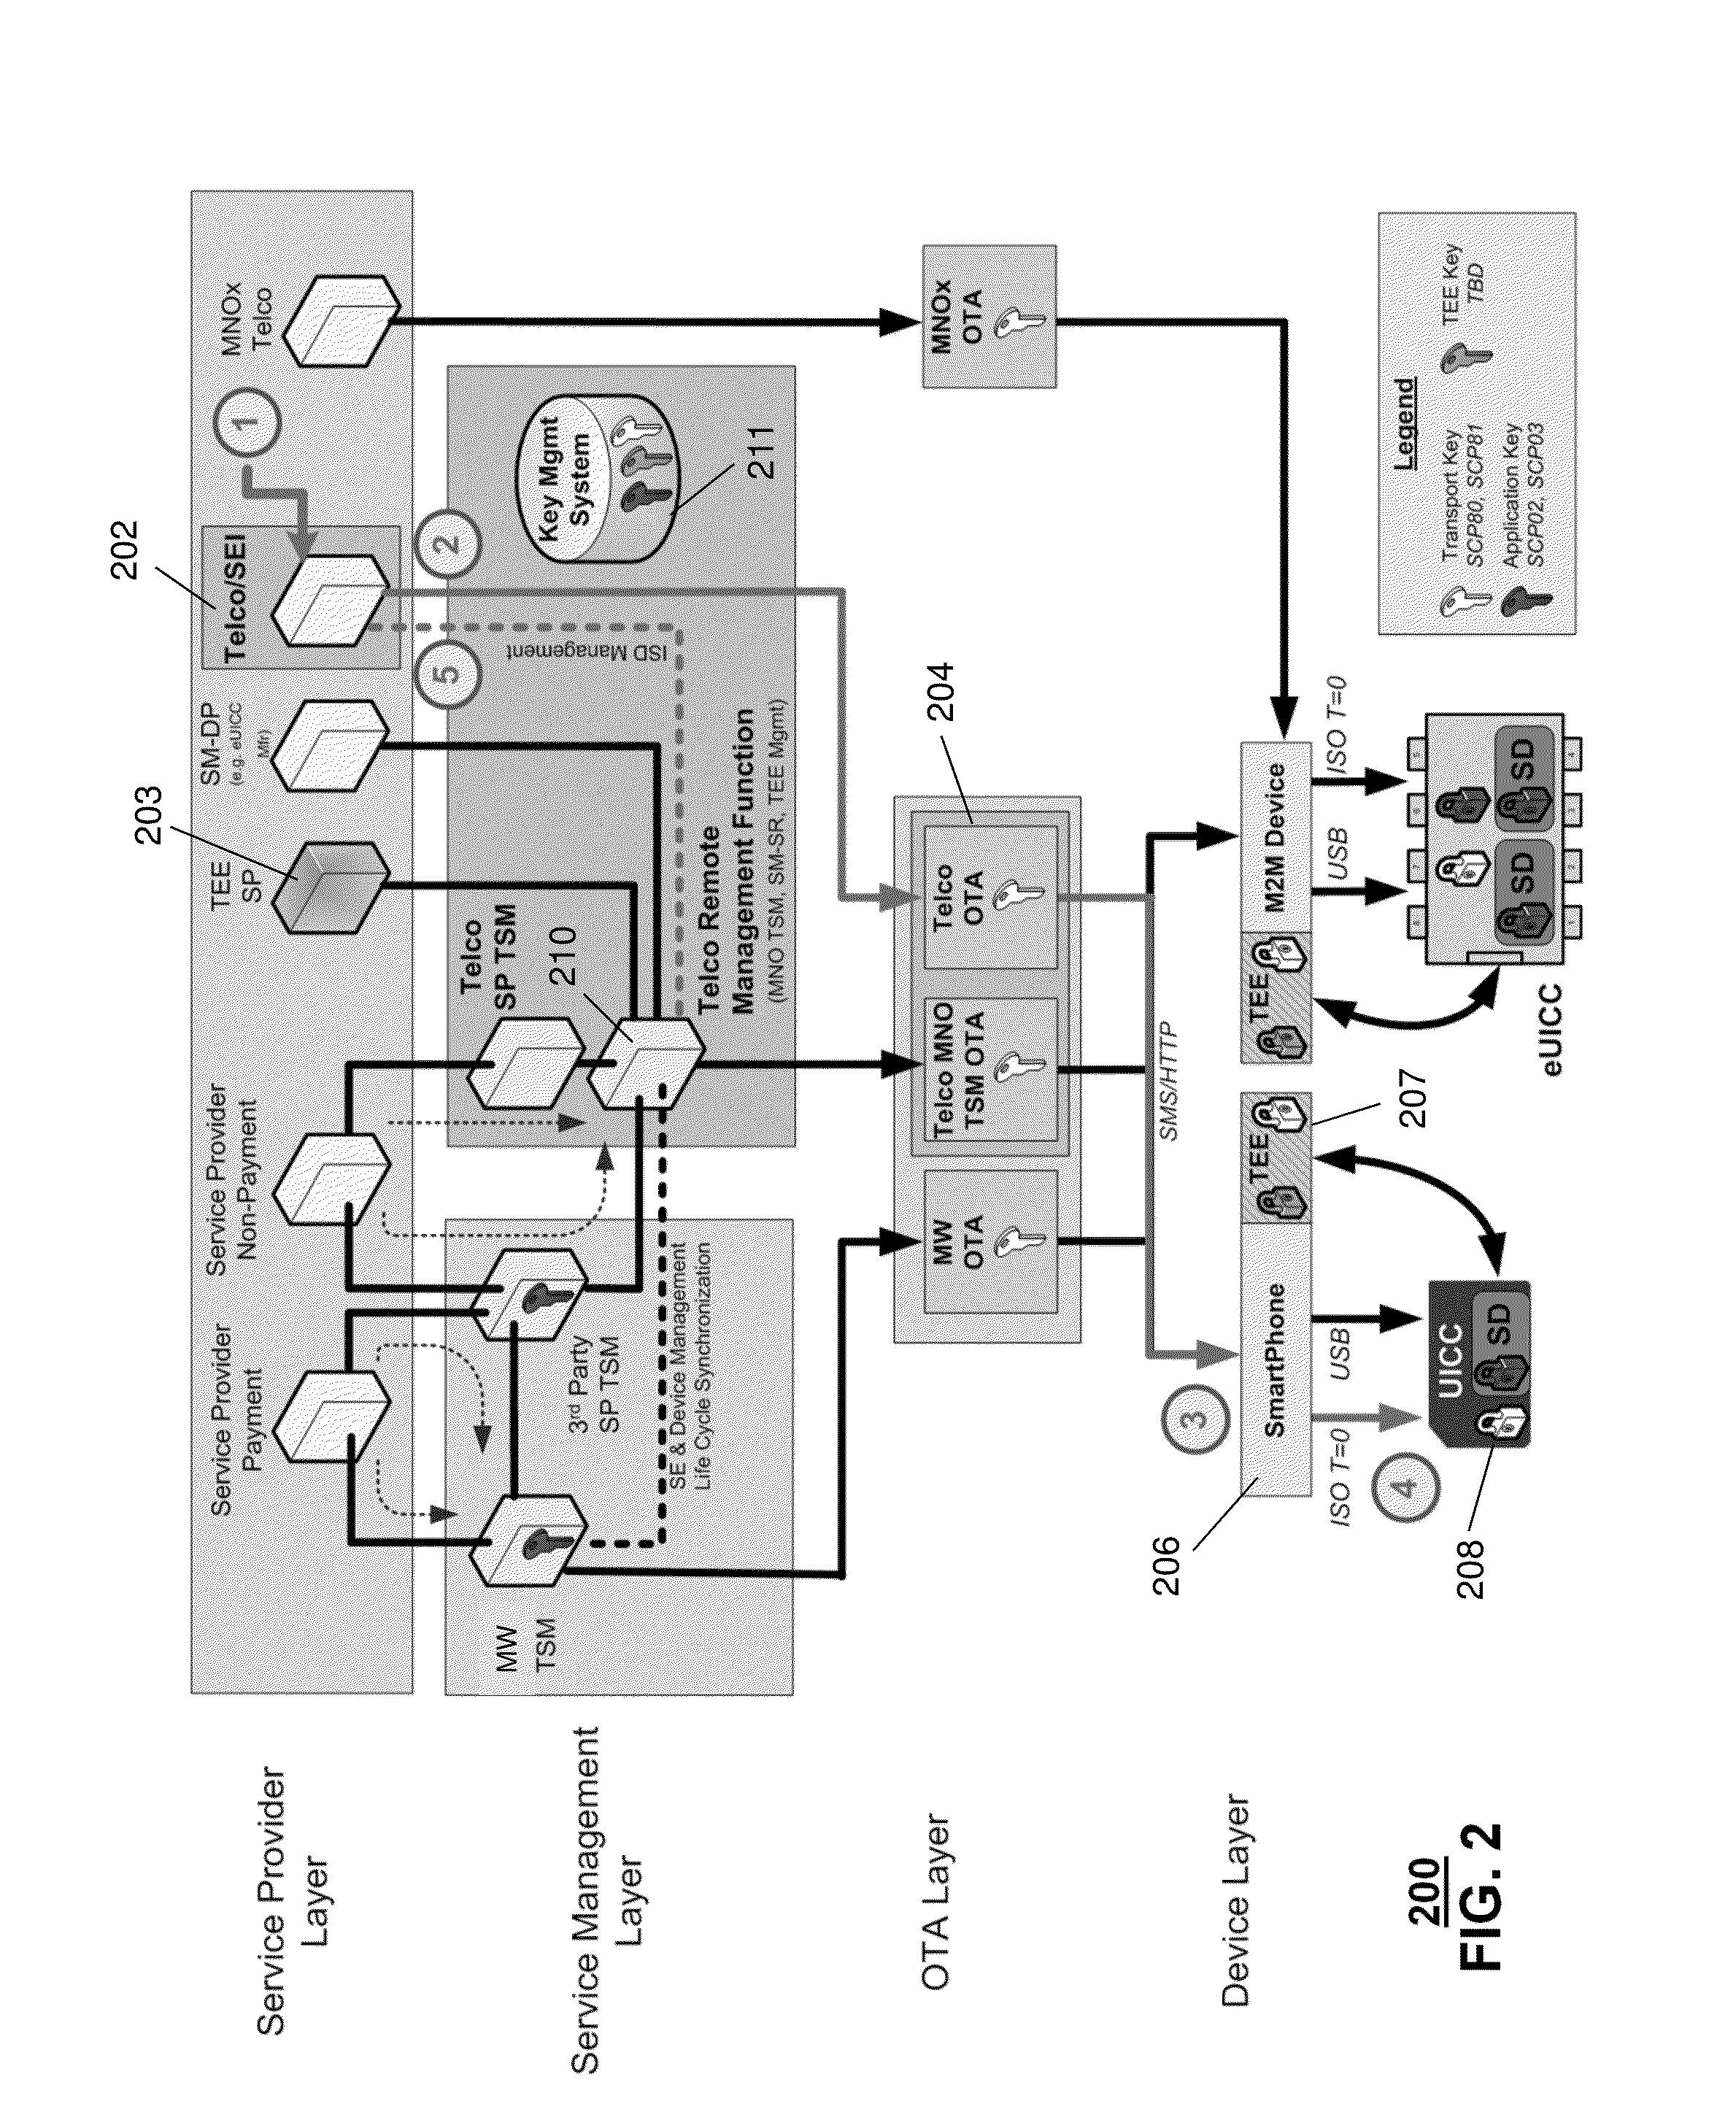 Methods for provisioning universal integrated circuit cards